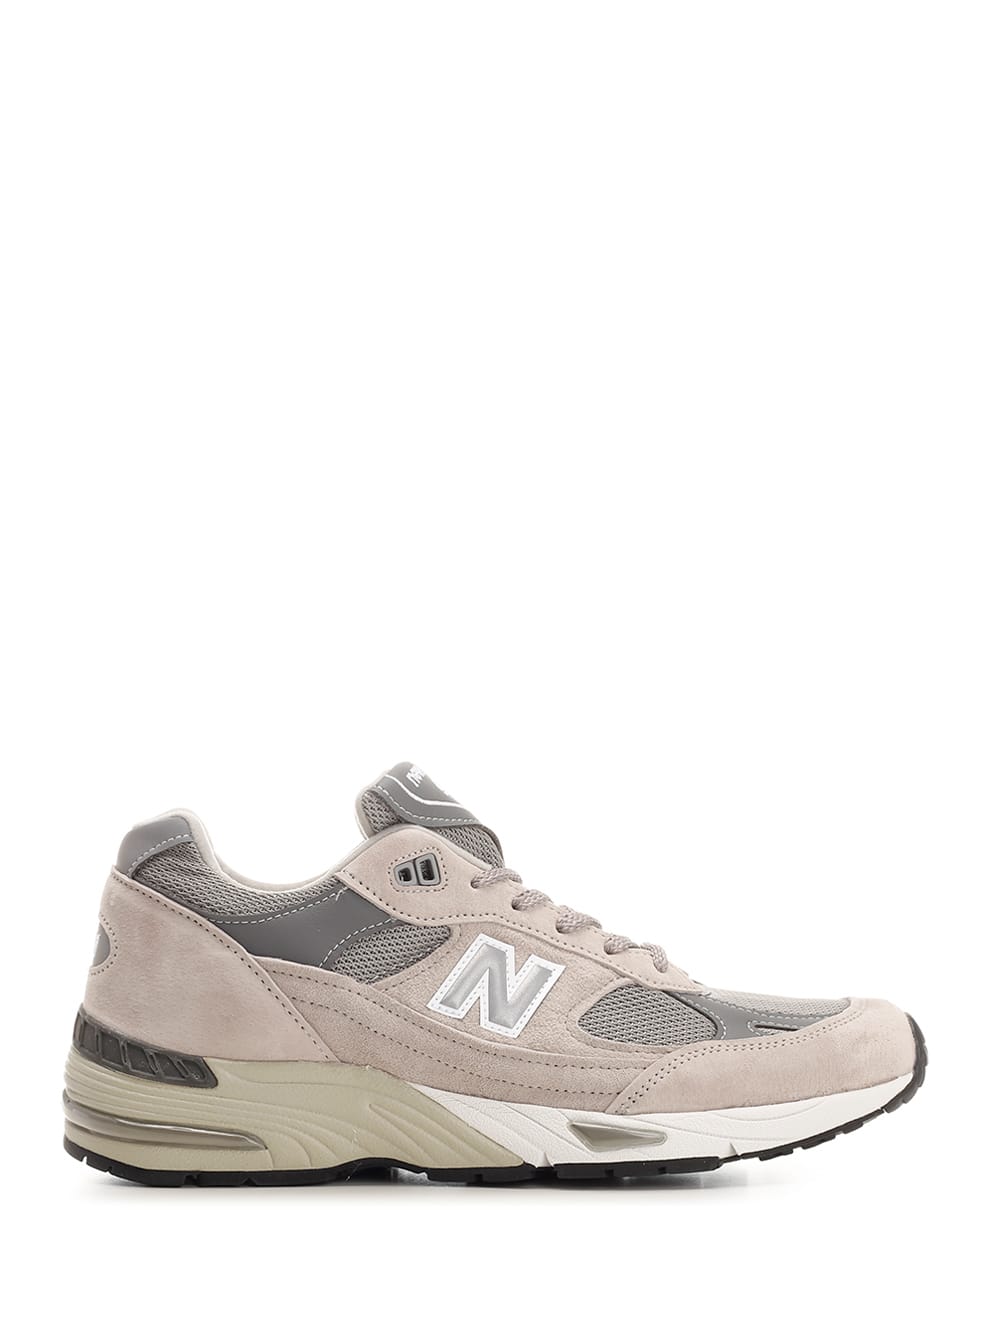 NEW BALANCE GREY SUEDE 991 SNEAKERS